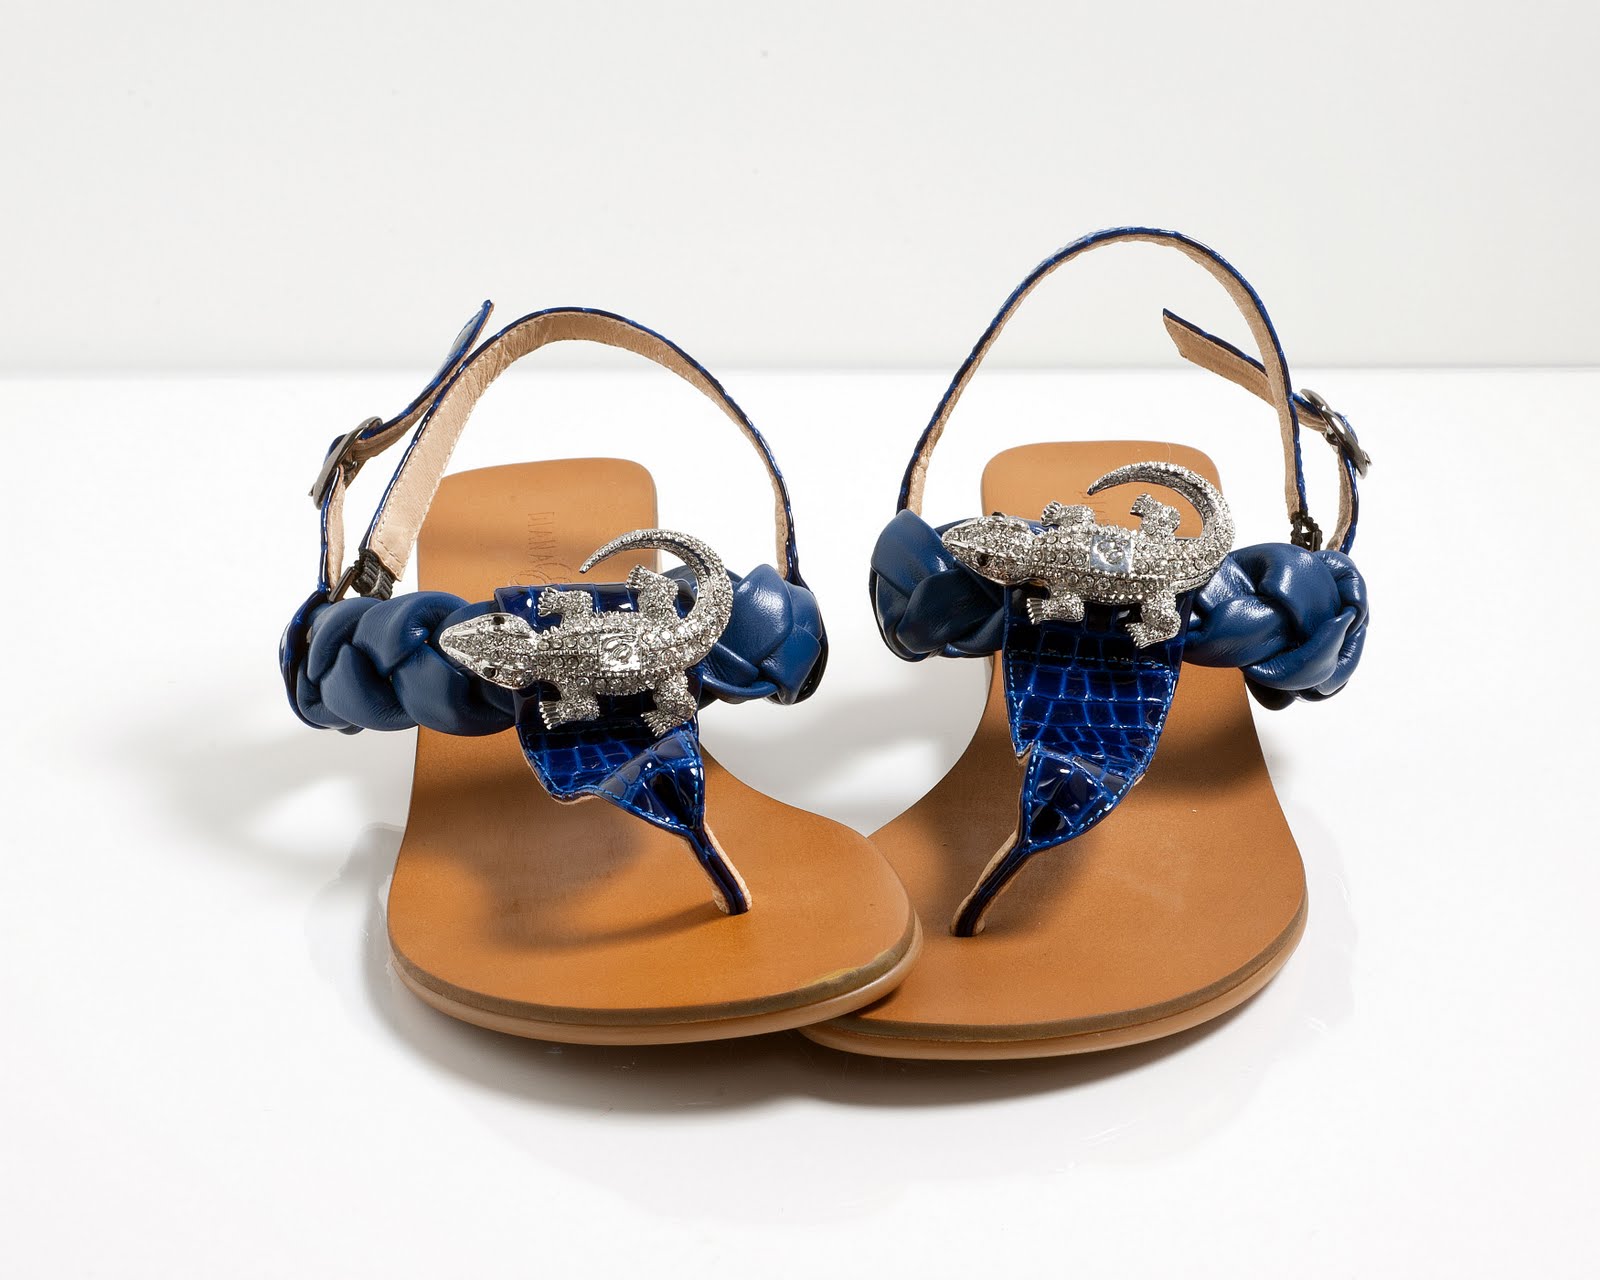 Wish List Wednesday: Diana E. Kelly - The Most Comfortable Shoes You ...